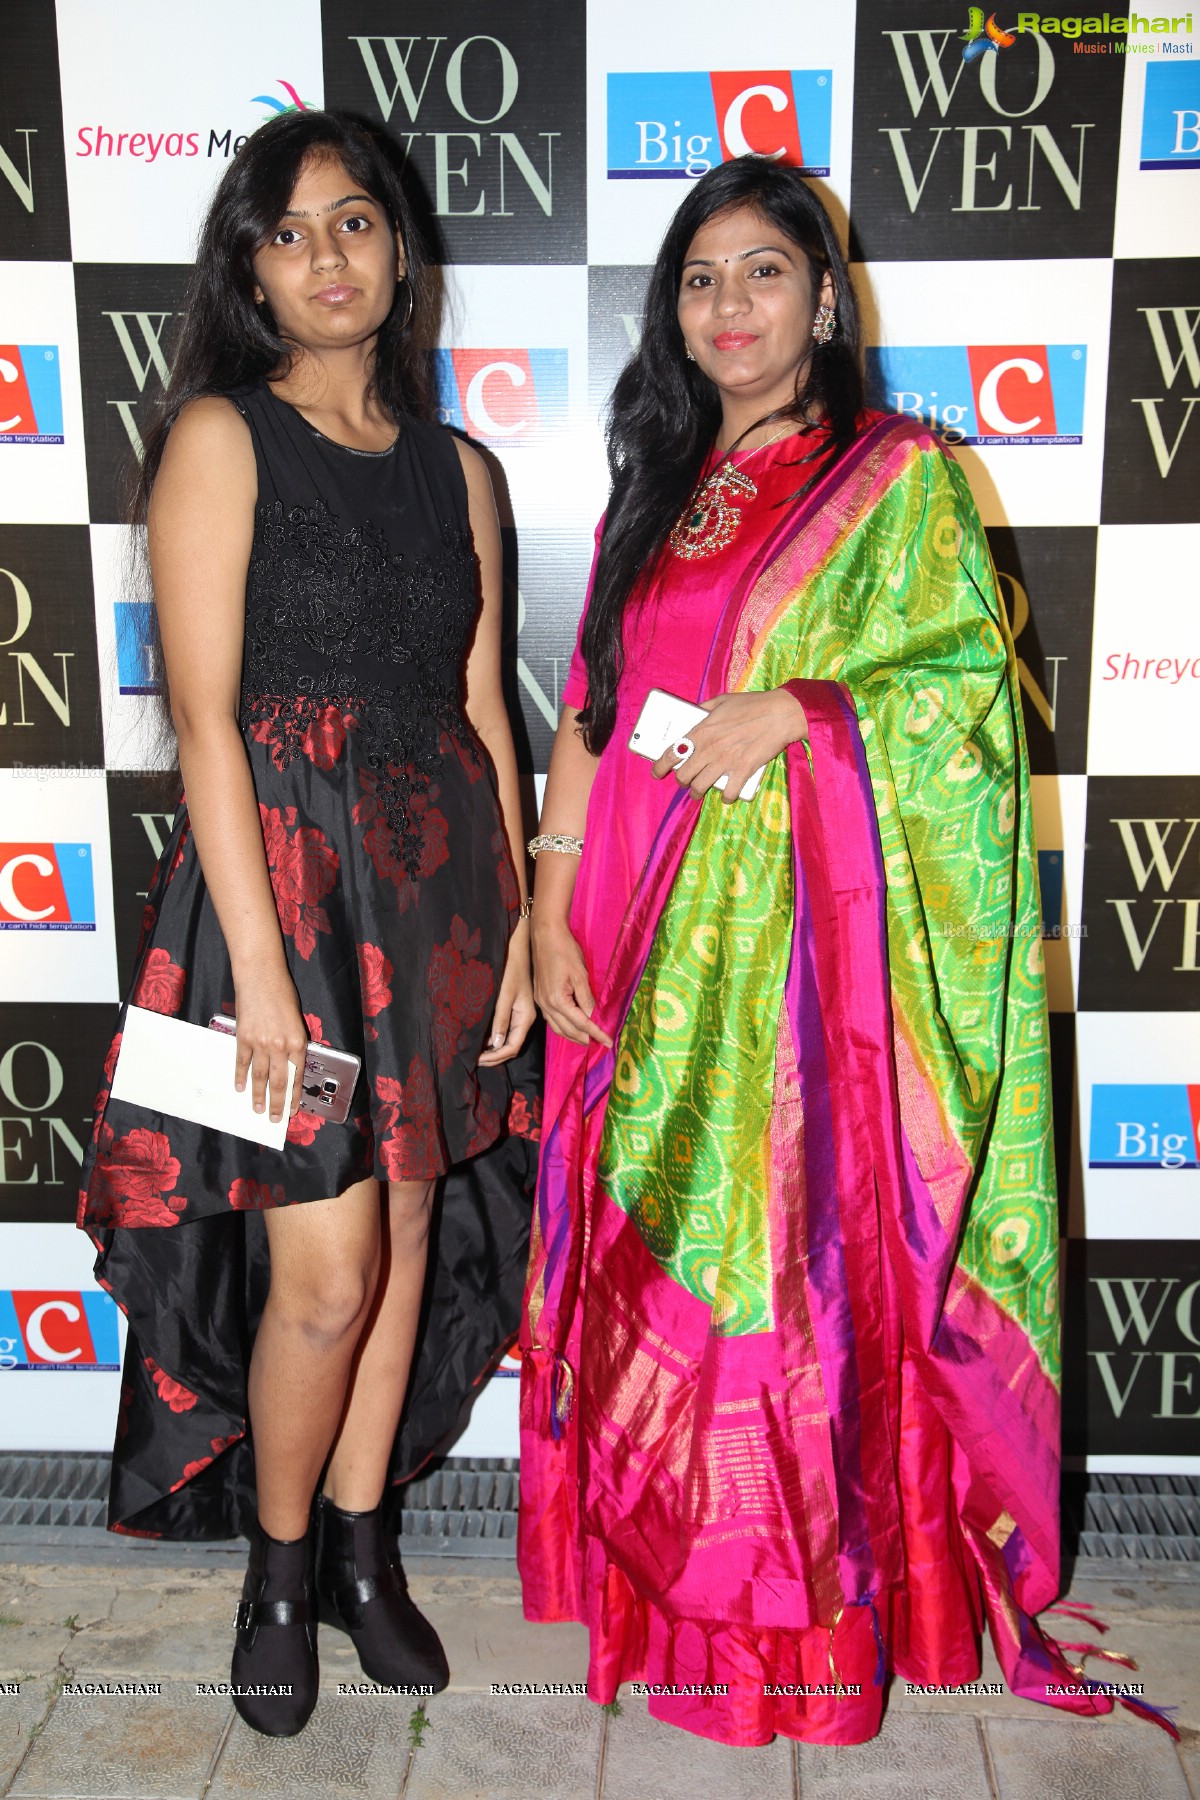 Woven 2017, Handloom Fashion show to support weavers